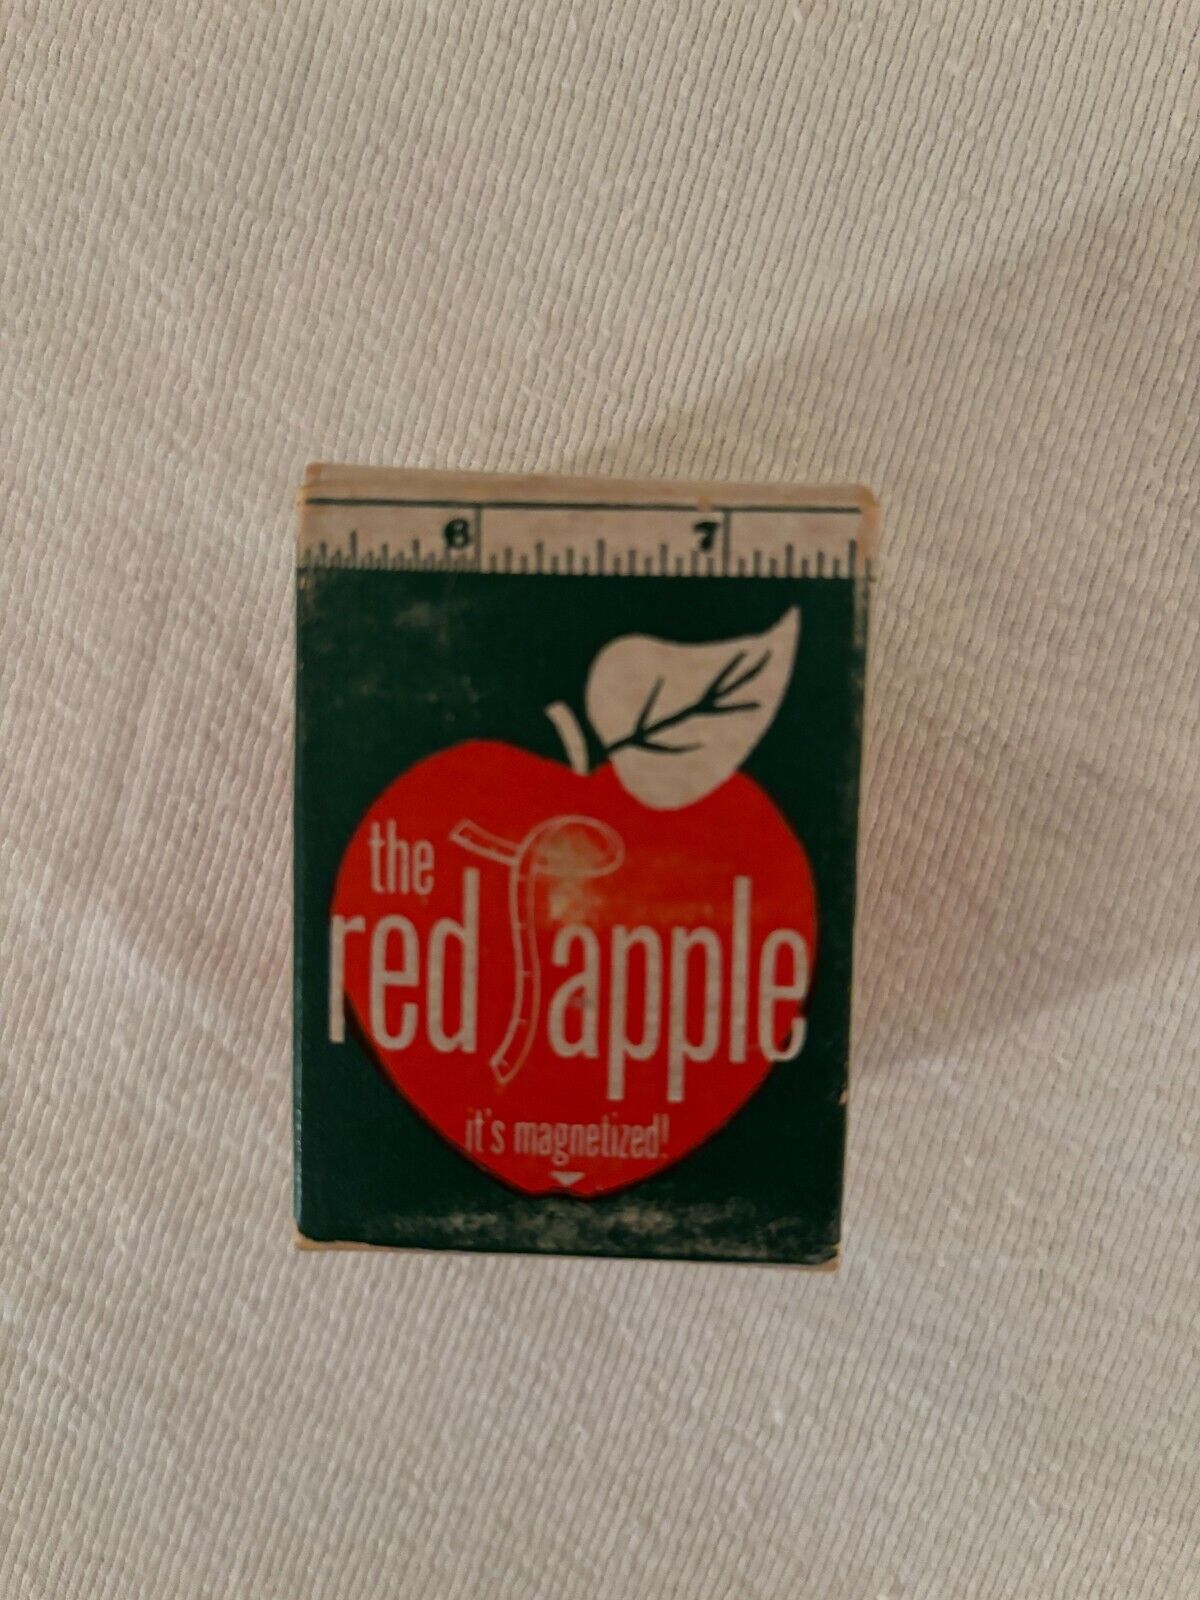 Vintage the Red Apple Measuring Tape with Original Box by United Device Corp.